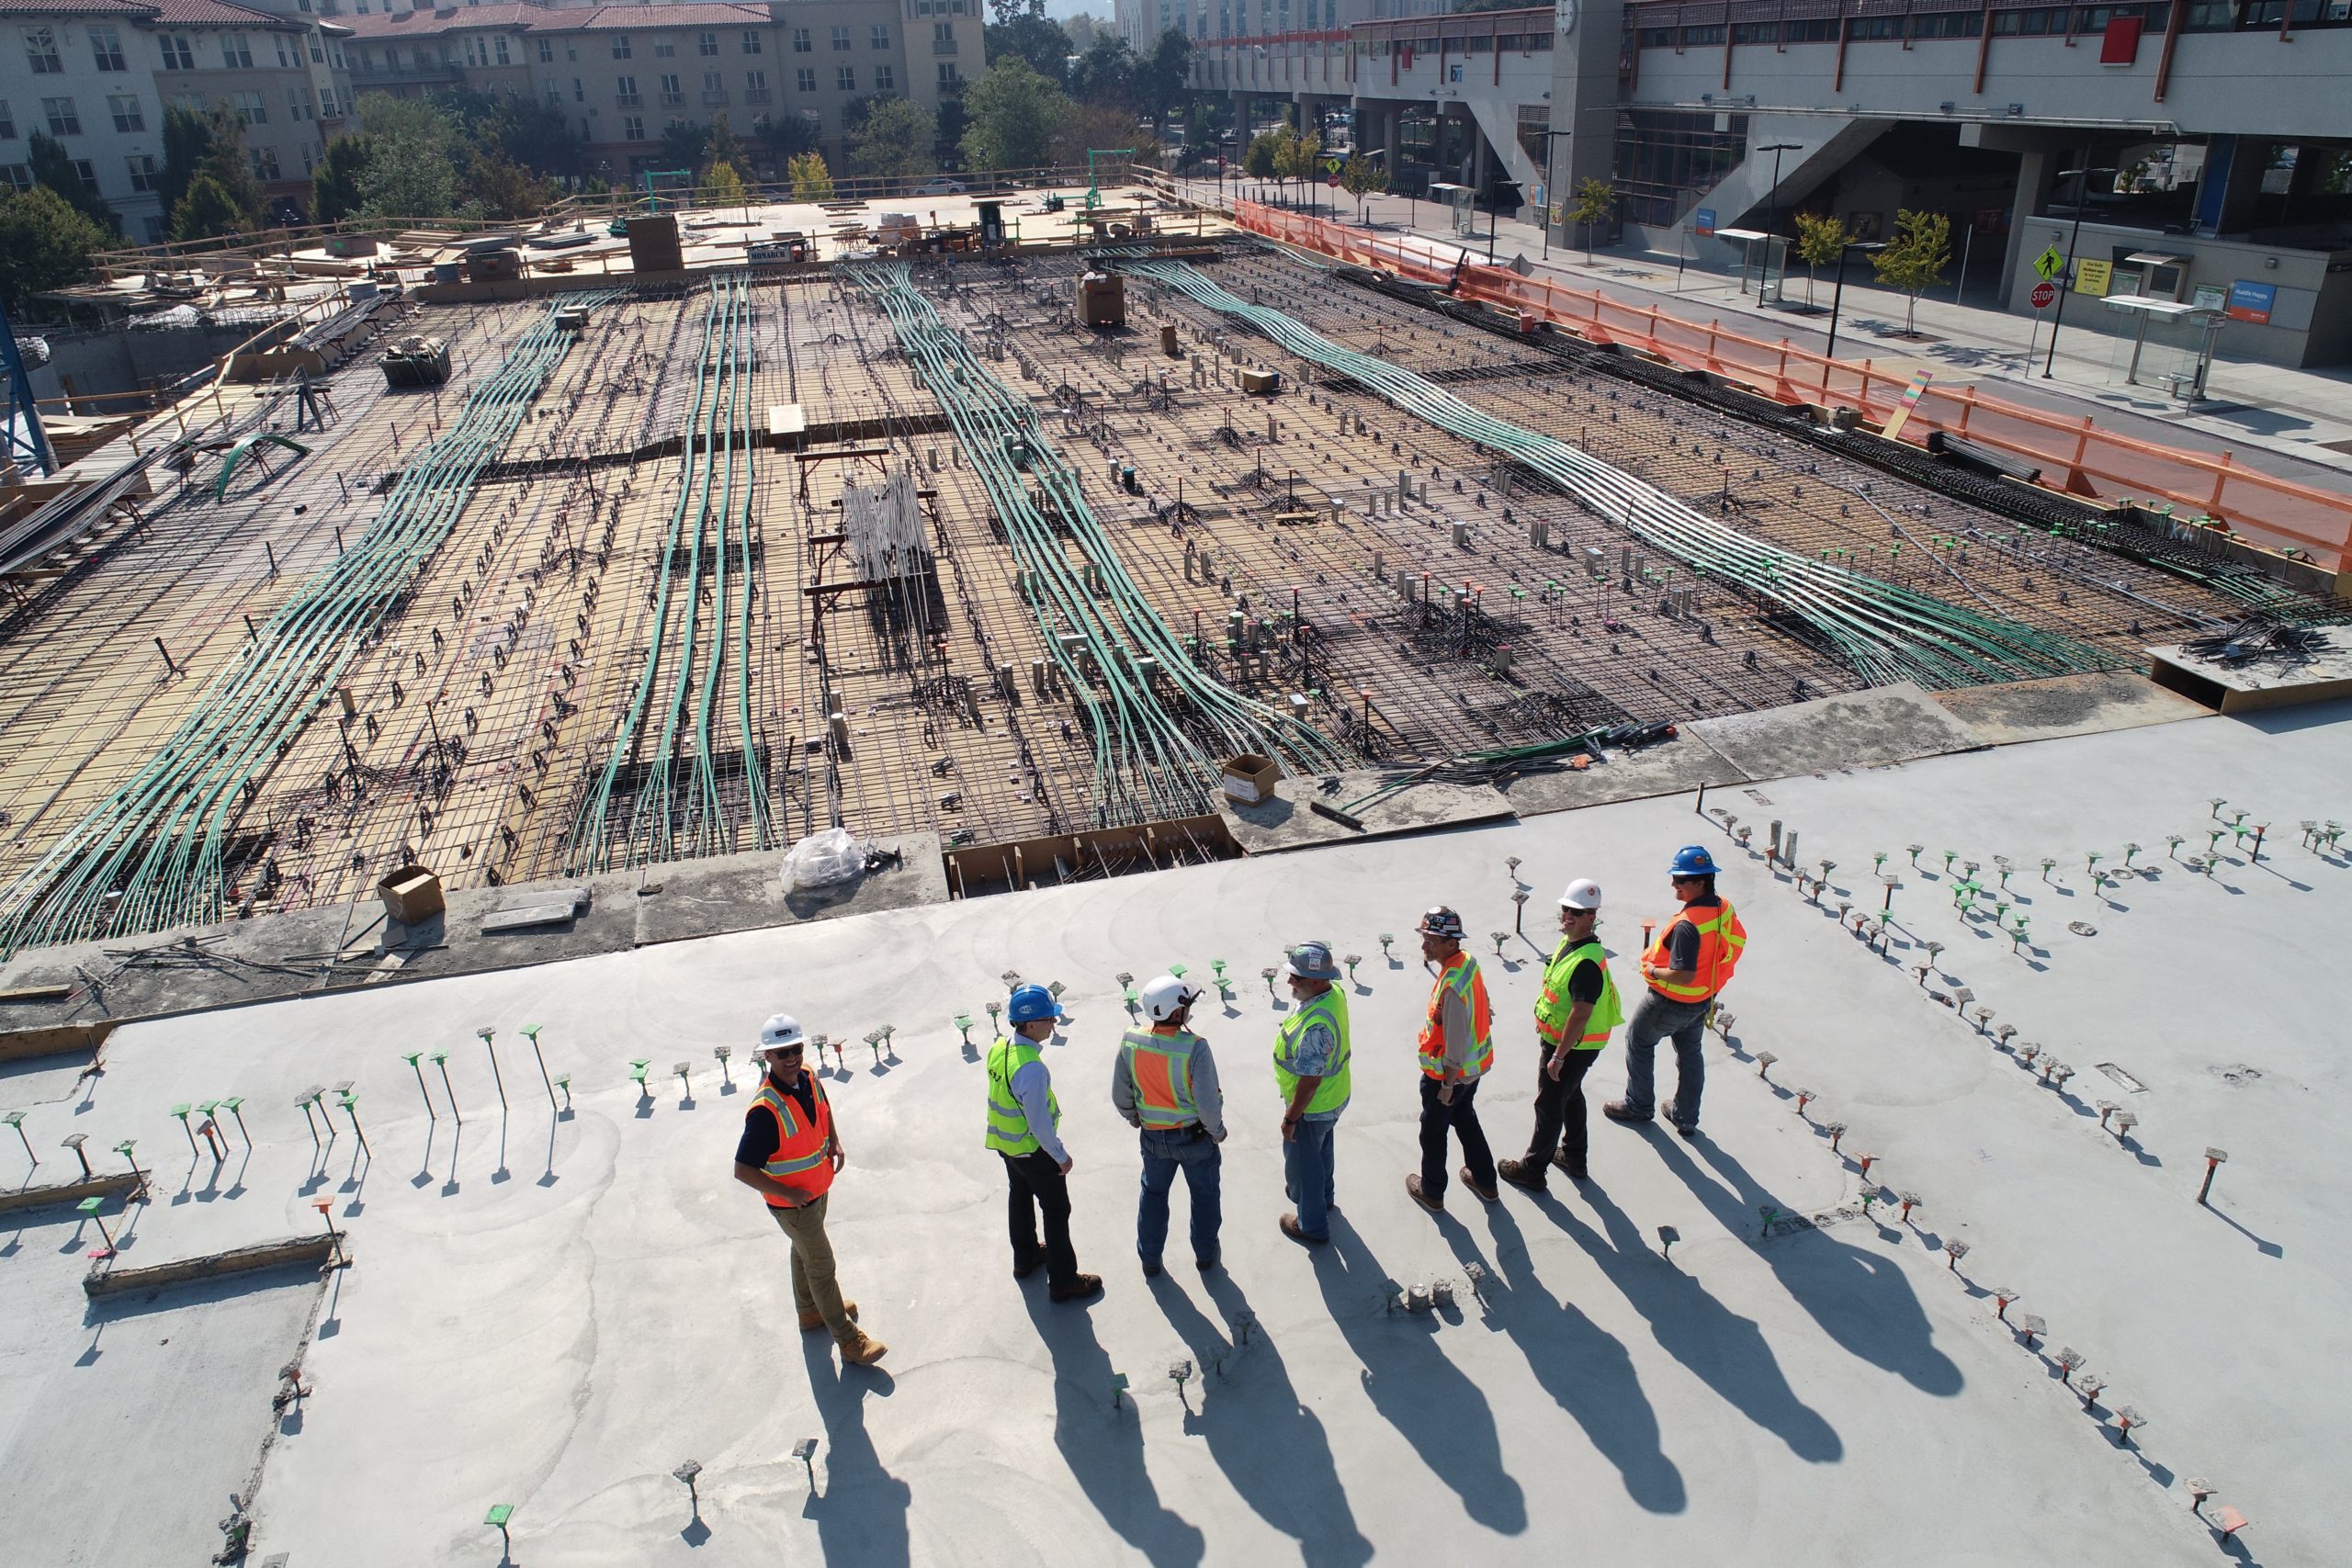 A line of workers in hard hats and high-vis vests standing on a concrete pad overlooking a large construction site. They cast long shadows behind them.